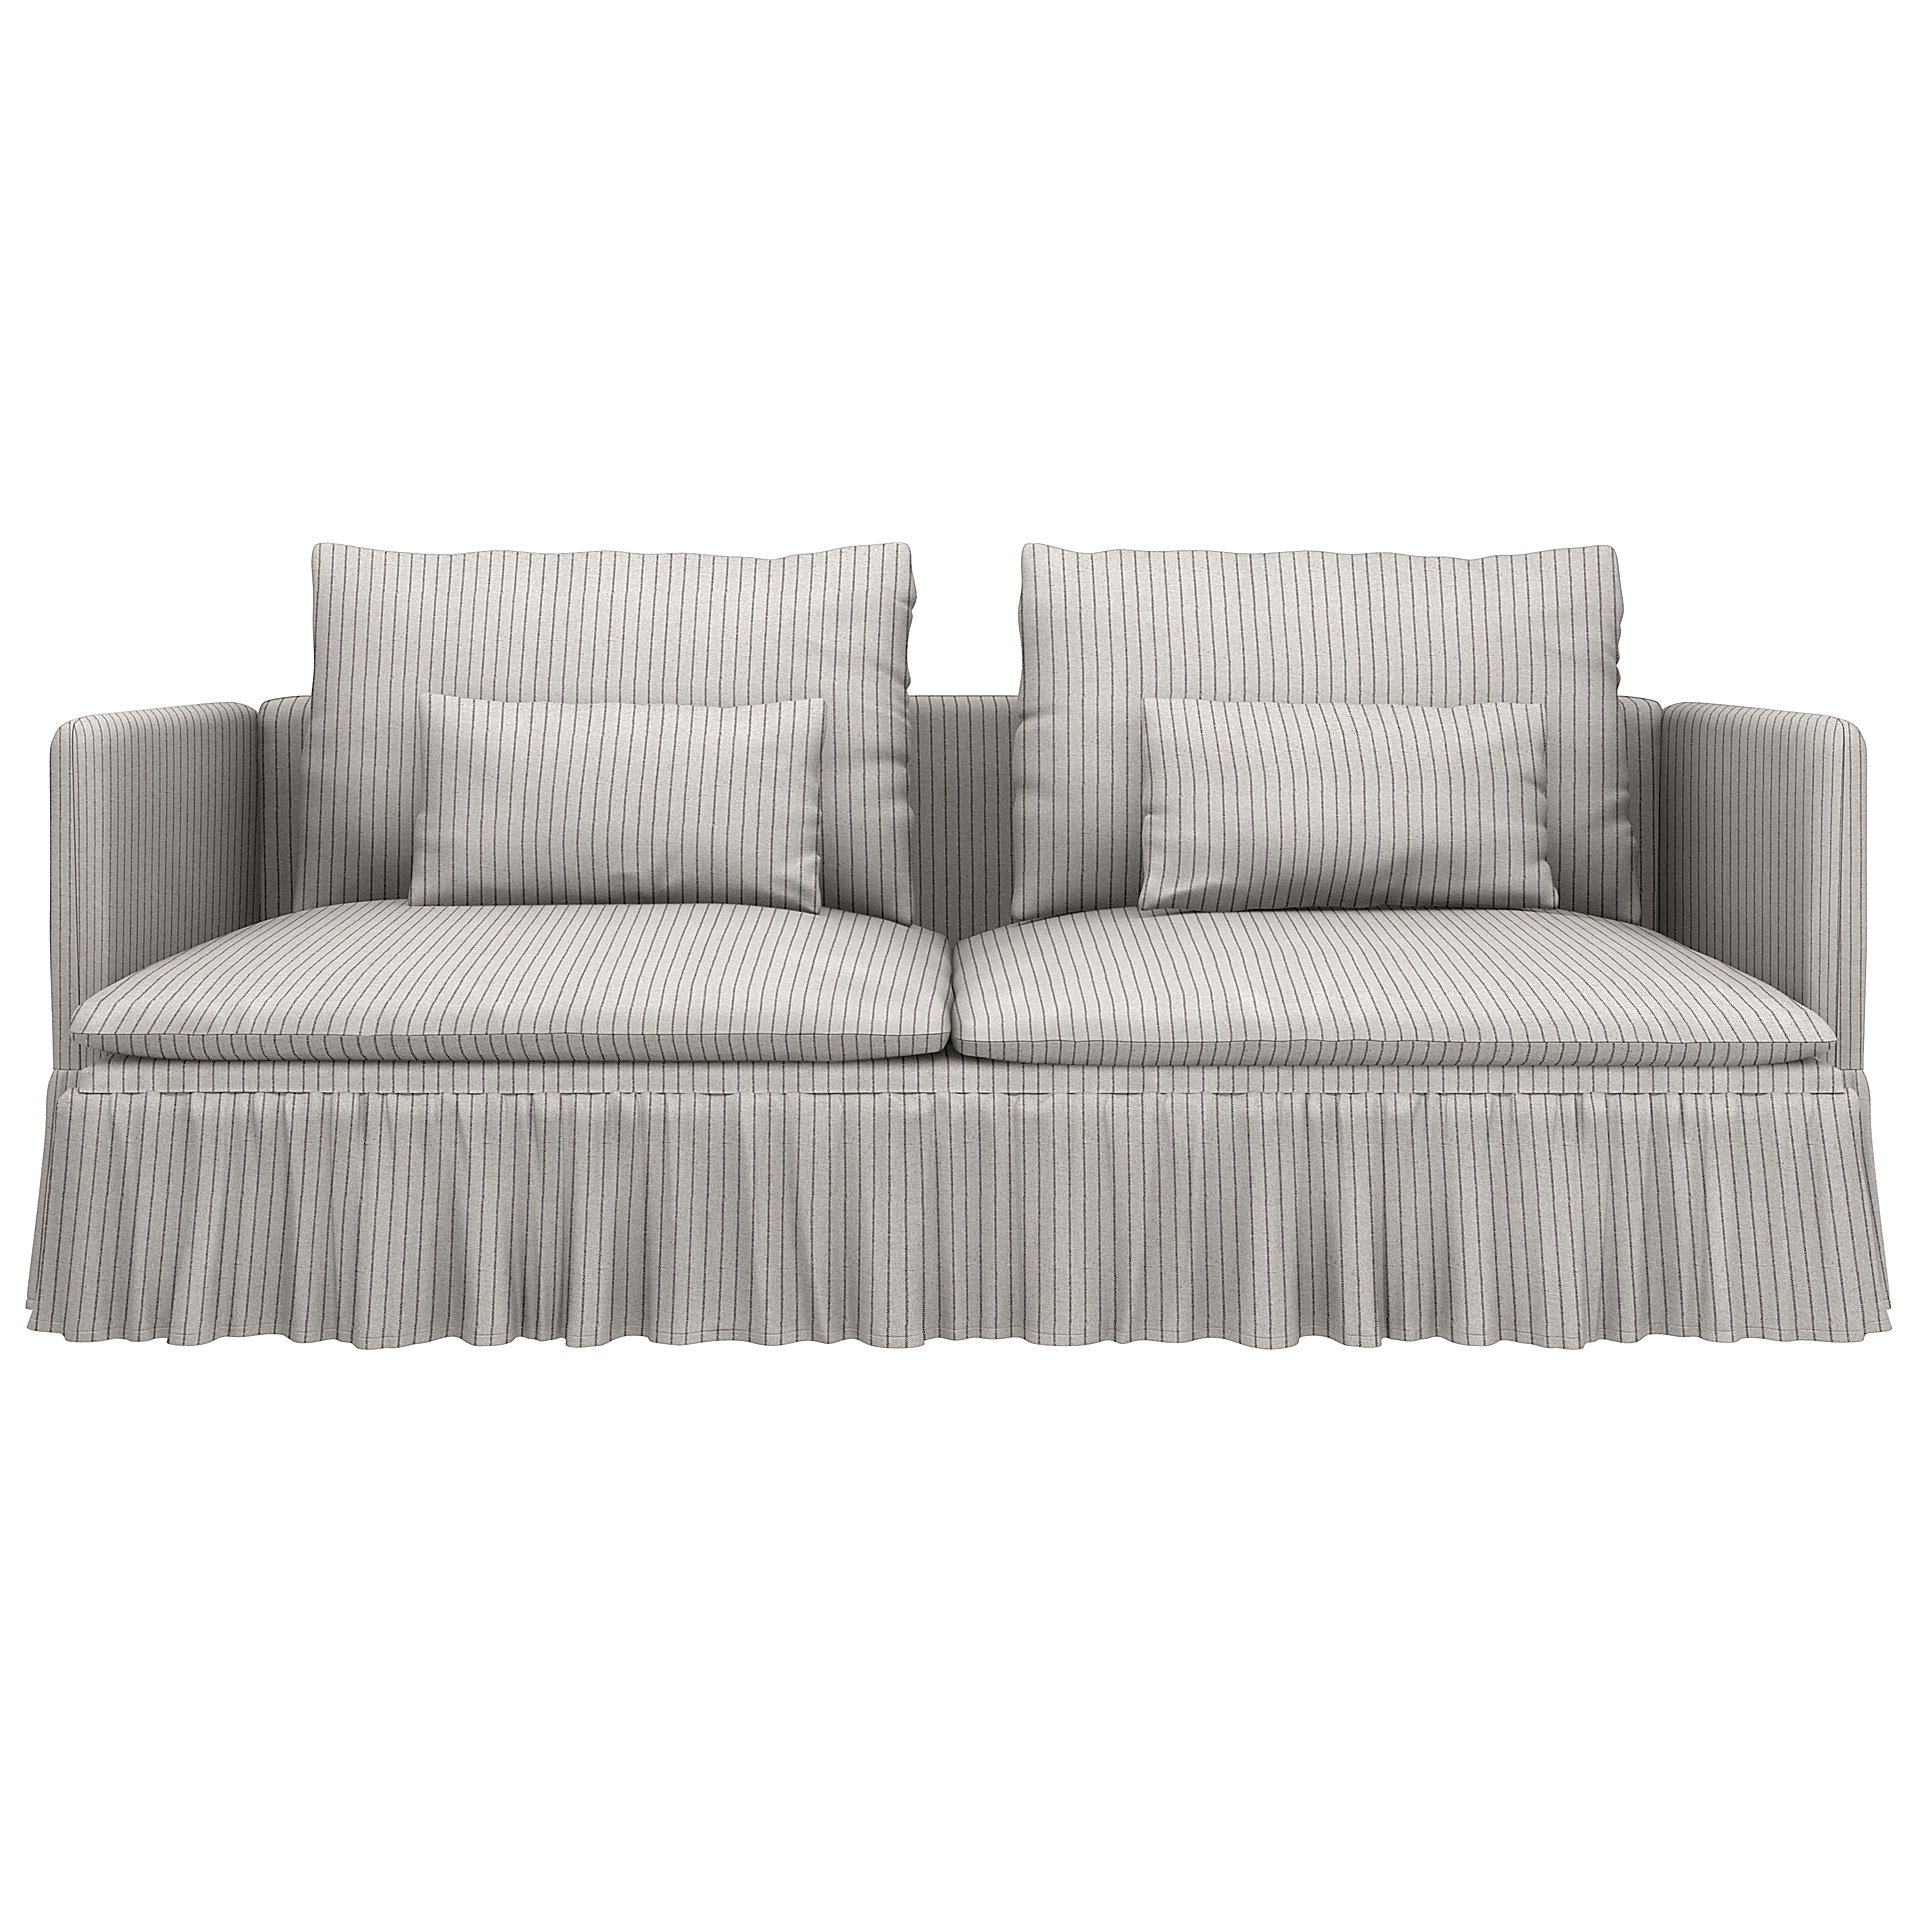 IKEA - Soderhamn 3 seater sofa with armrests cover, Silver Grey, Cotton - Bemz